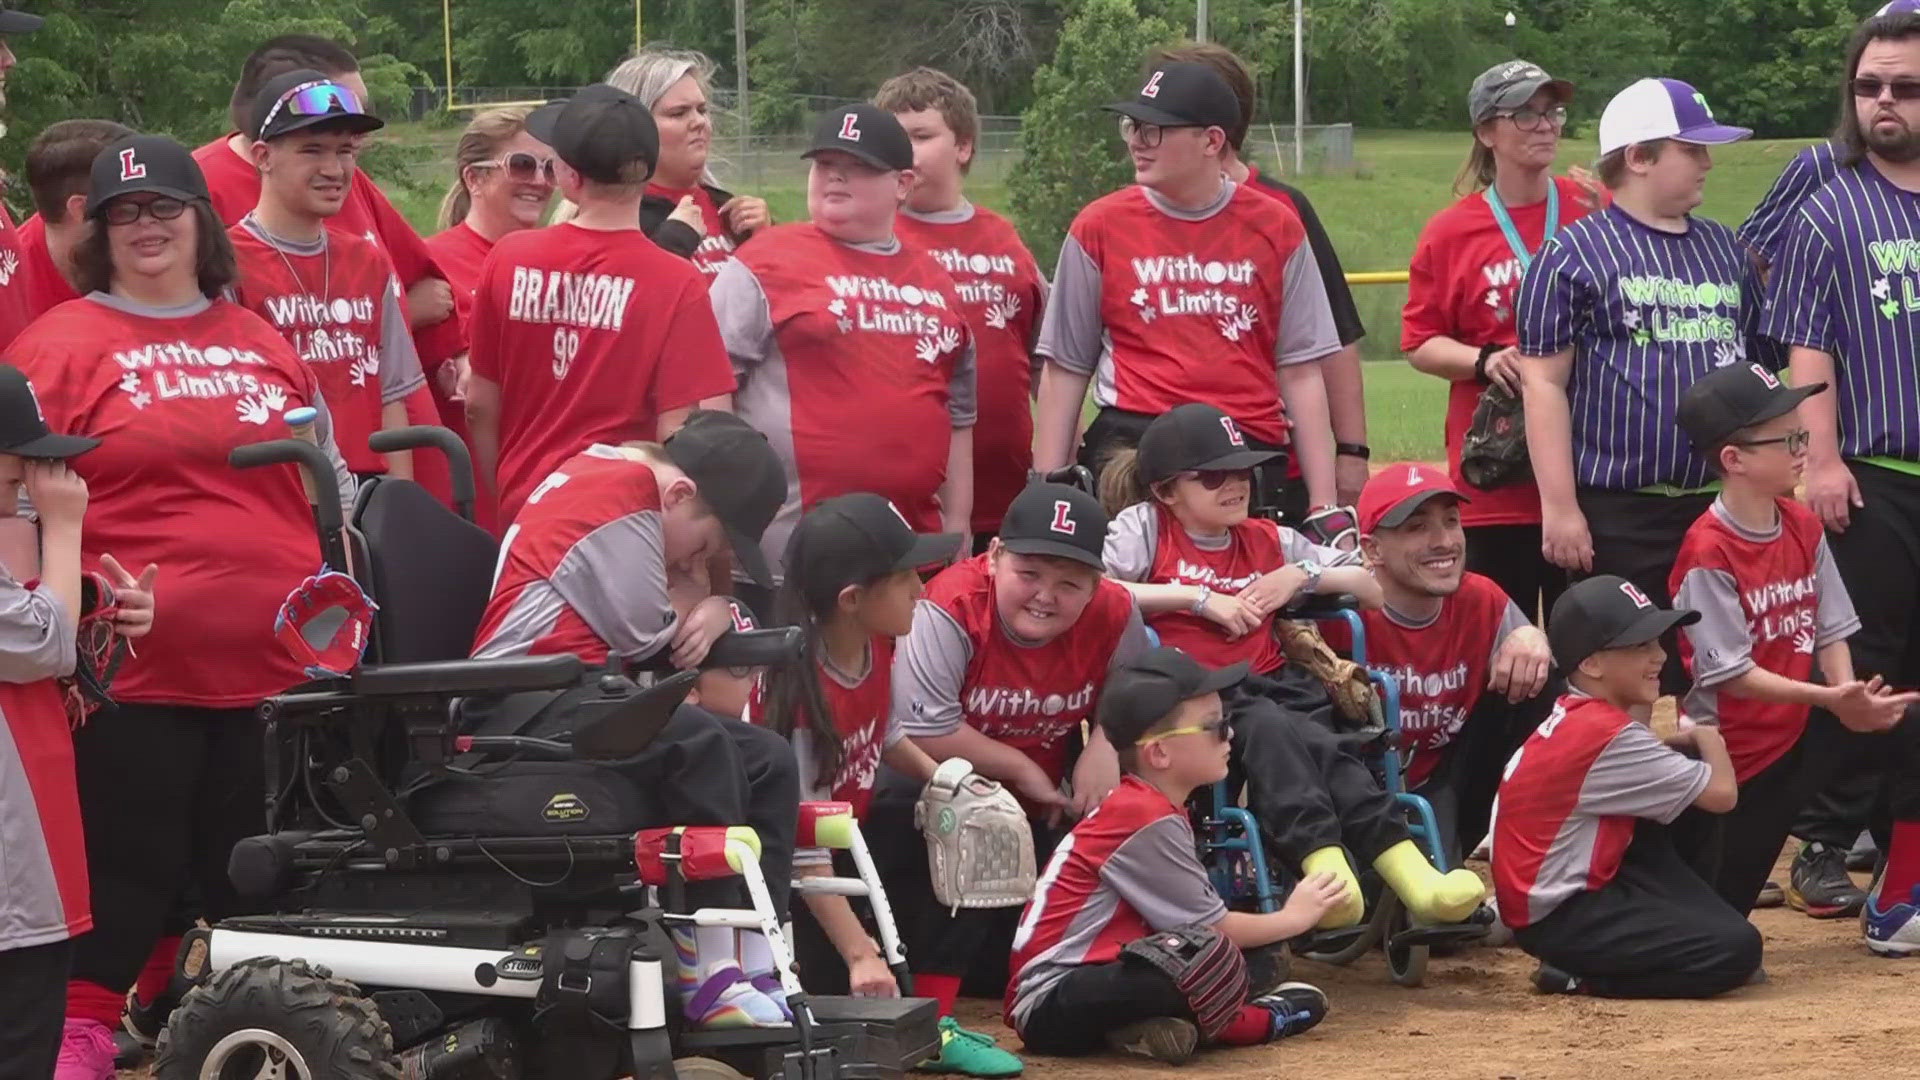 Without Limits is an organization that started in Monroe County six years ago.
the goal is to offer baseball to kids and adults with special needs.